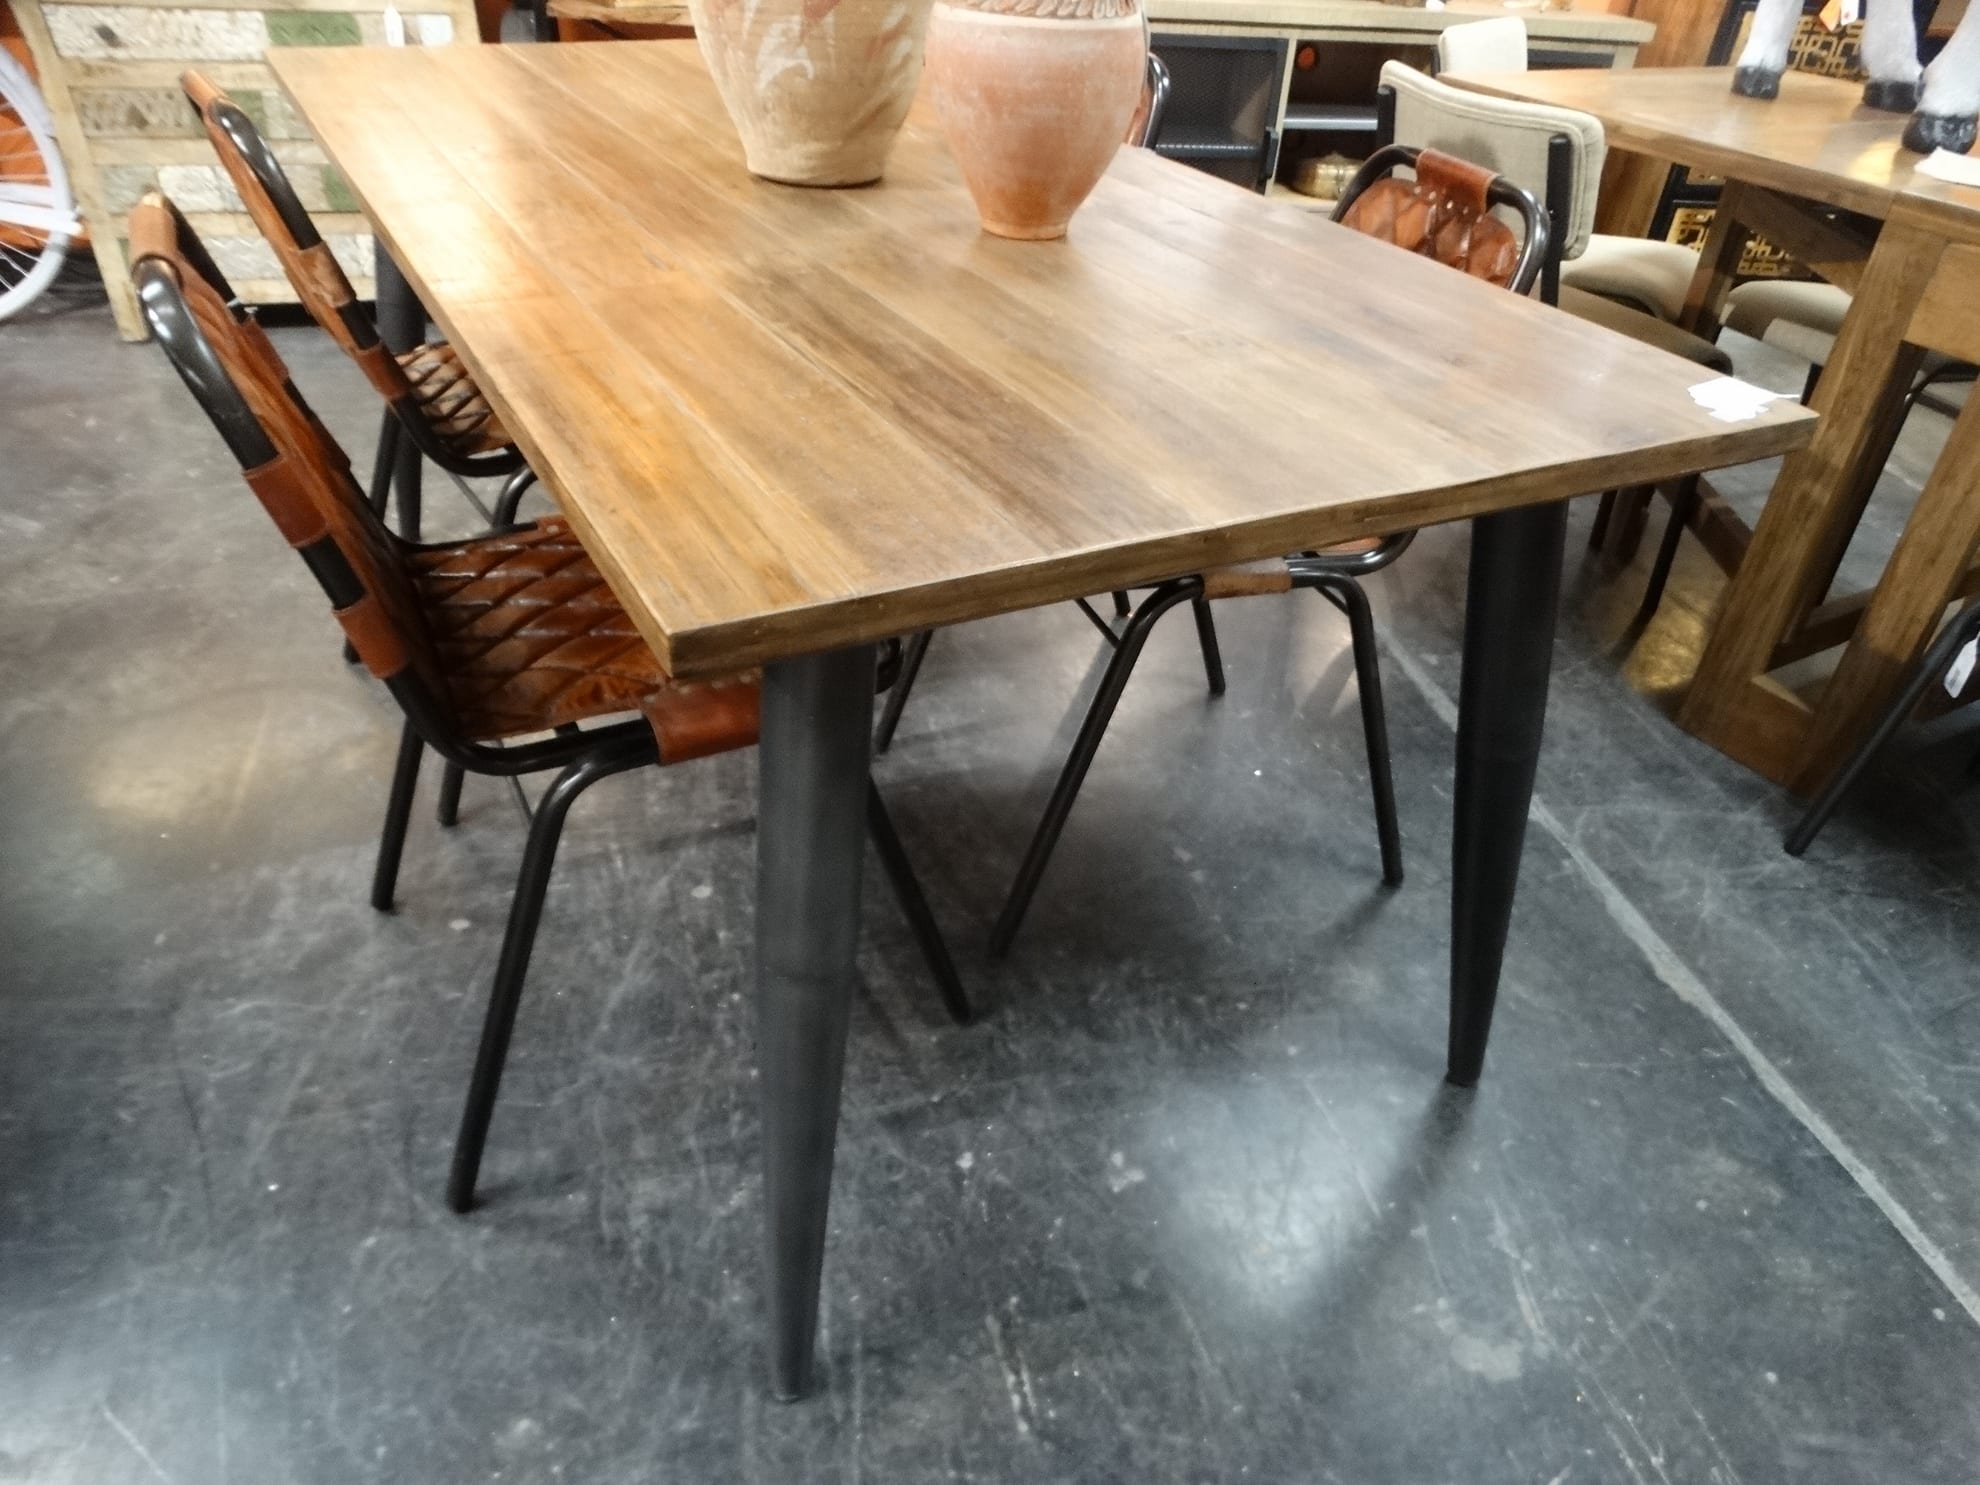 Wood And Iron Dining Table Features A Wood Top And Metal Legs